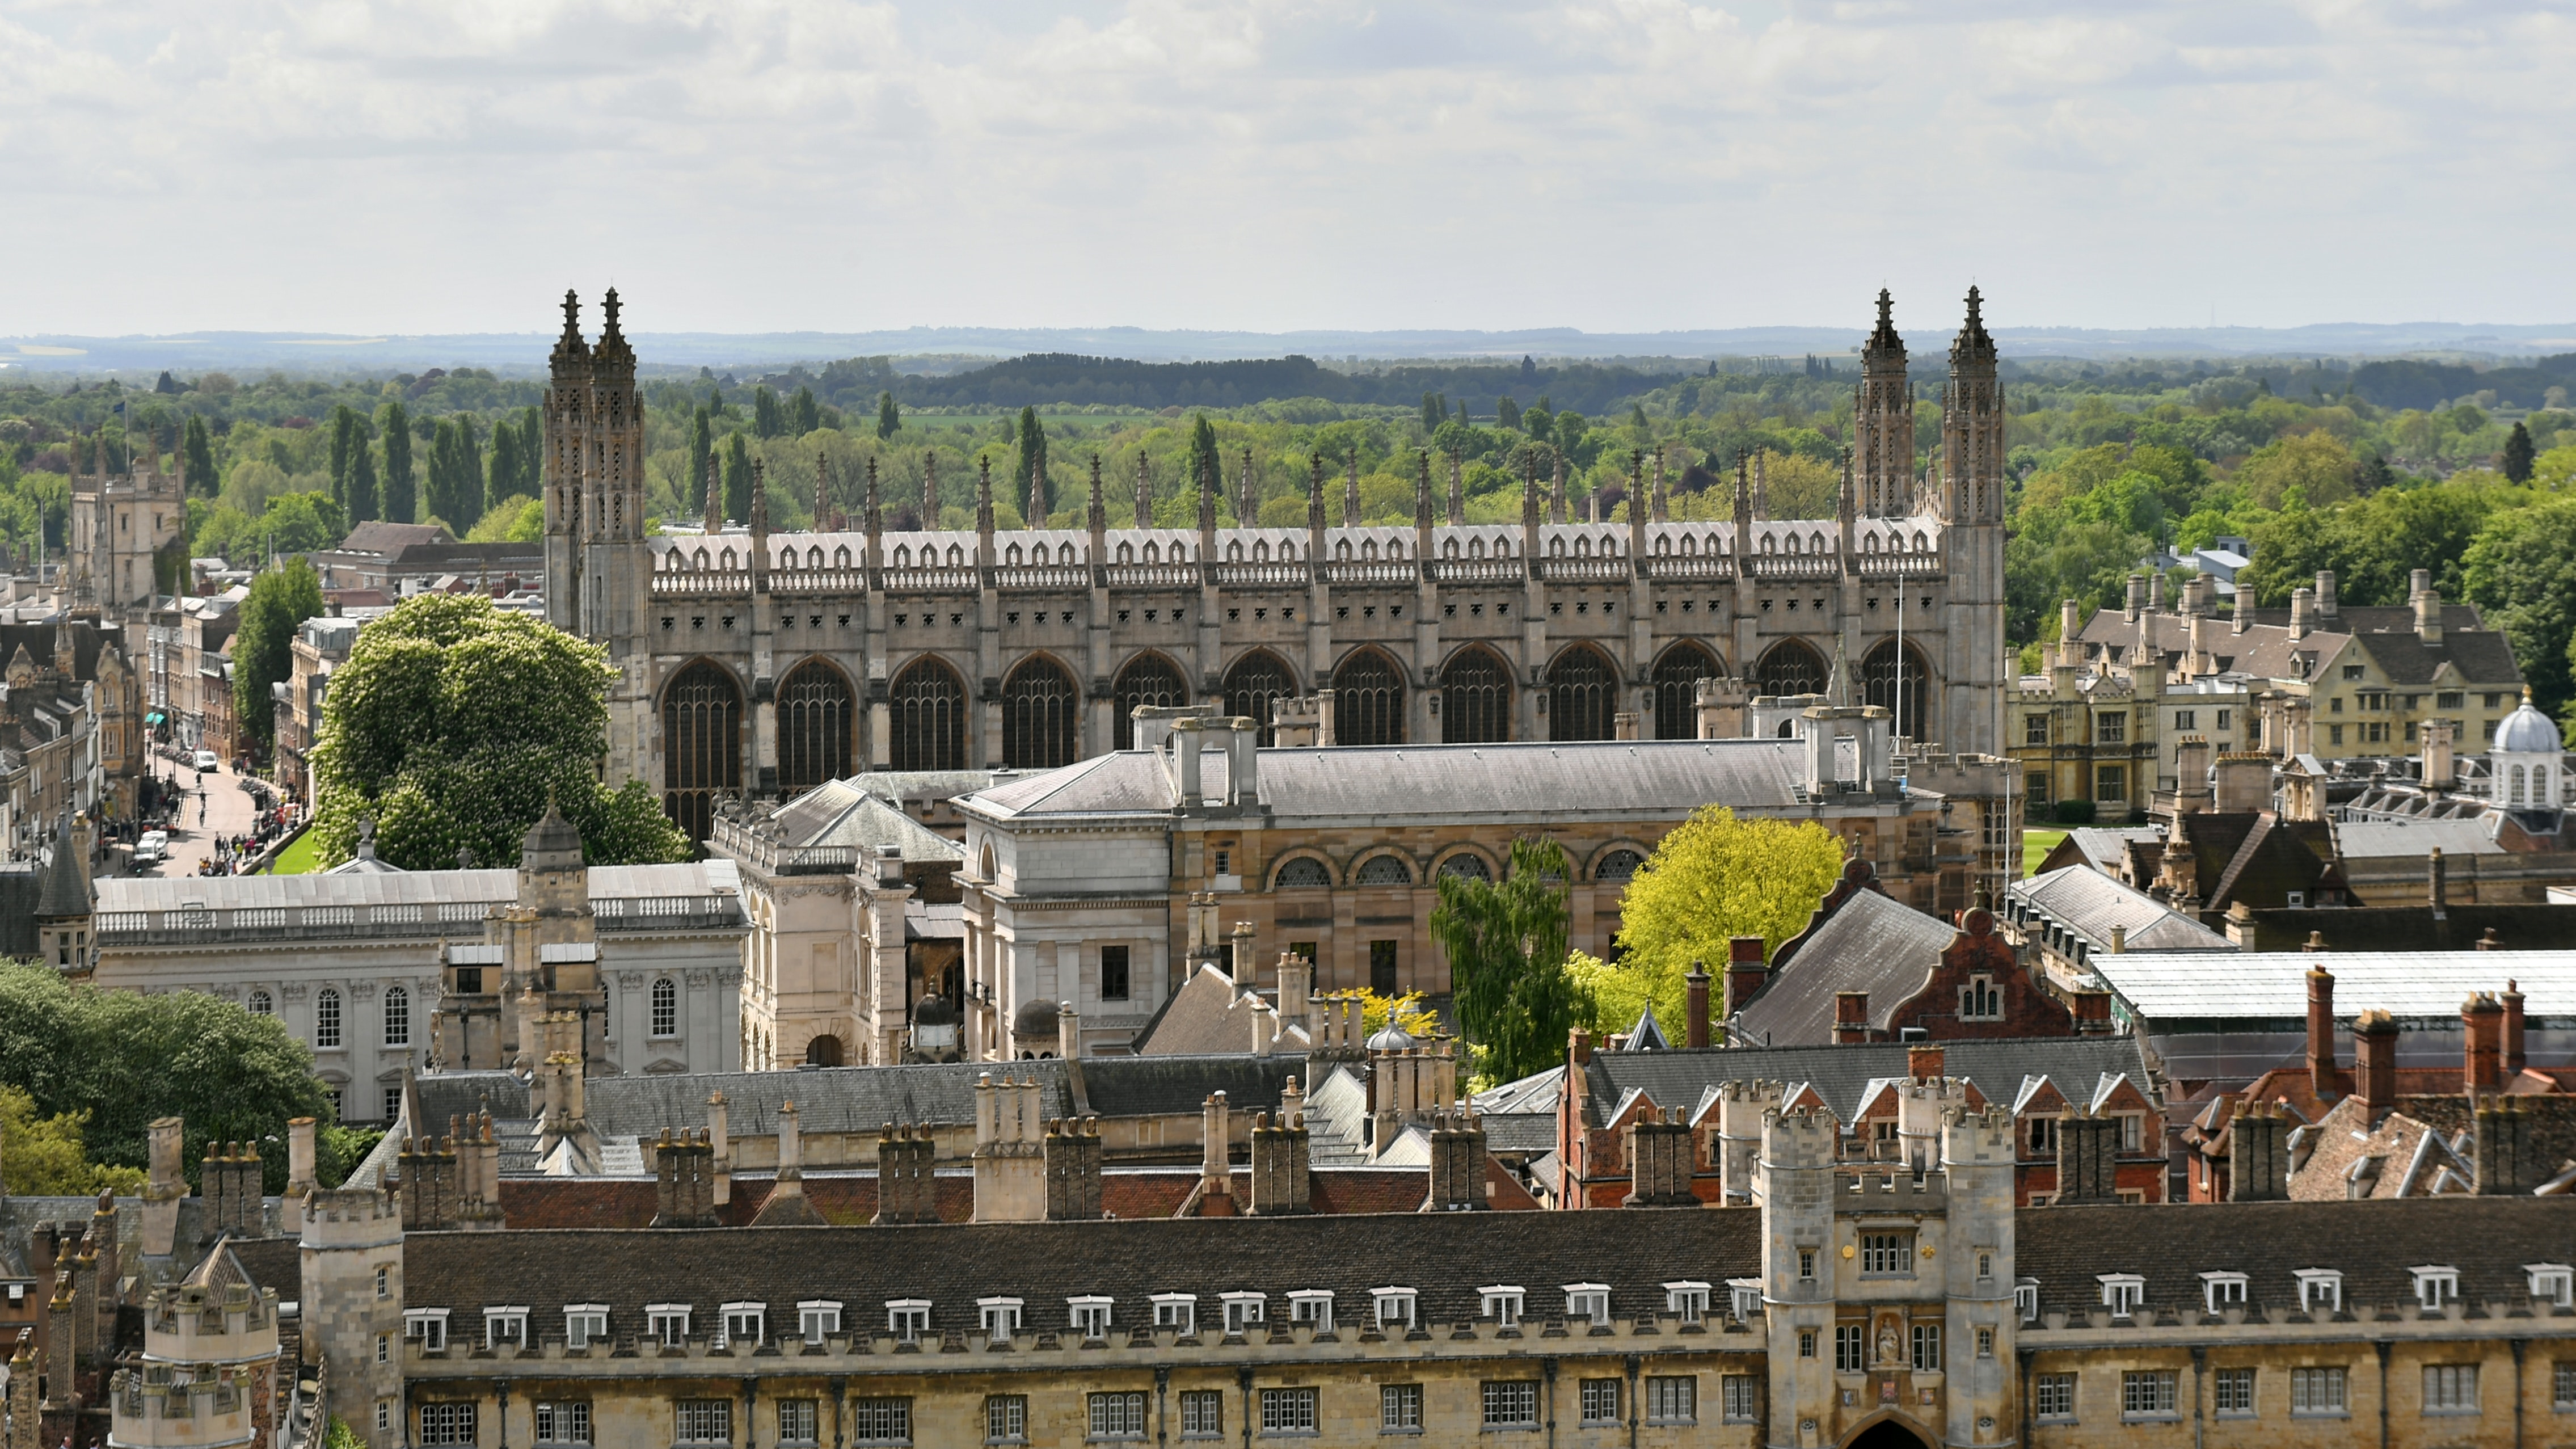 Cambridge University says rise in Black students caused by ‘Stormzy effect’